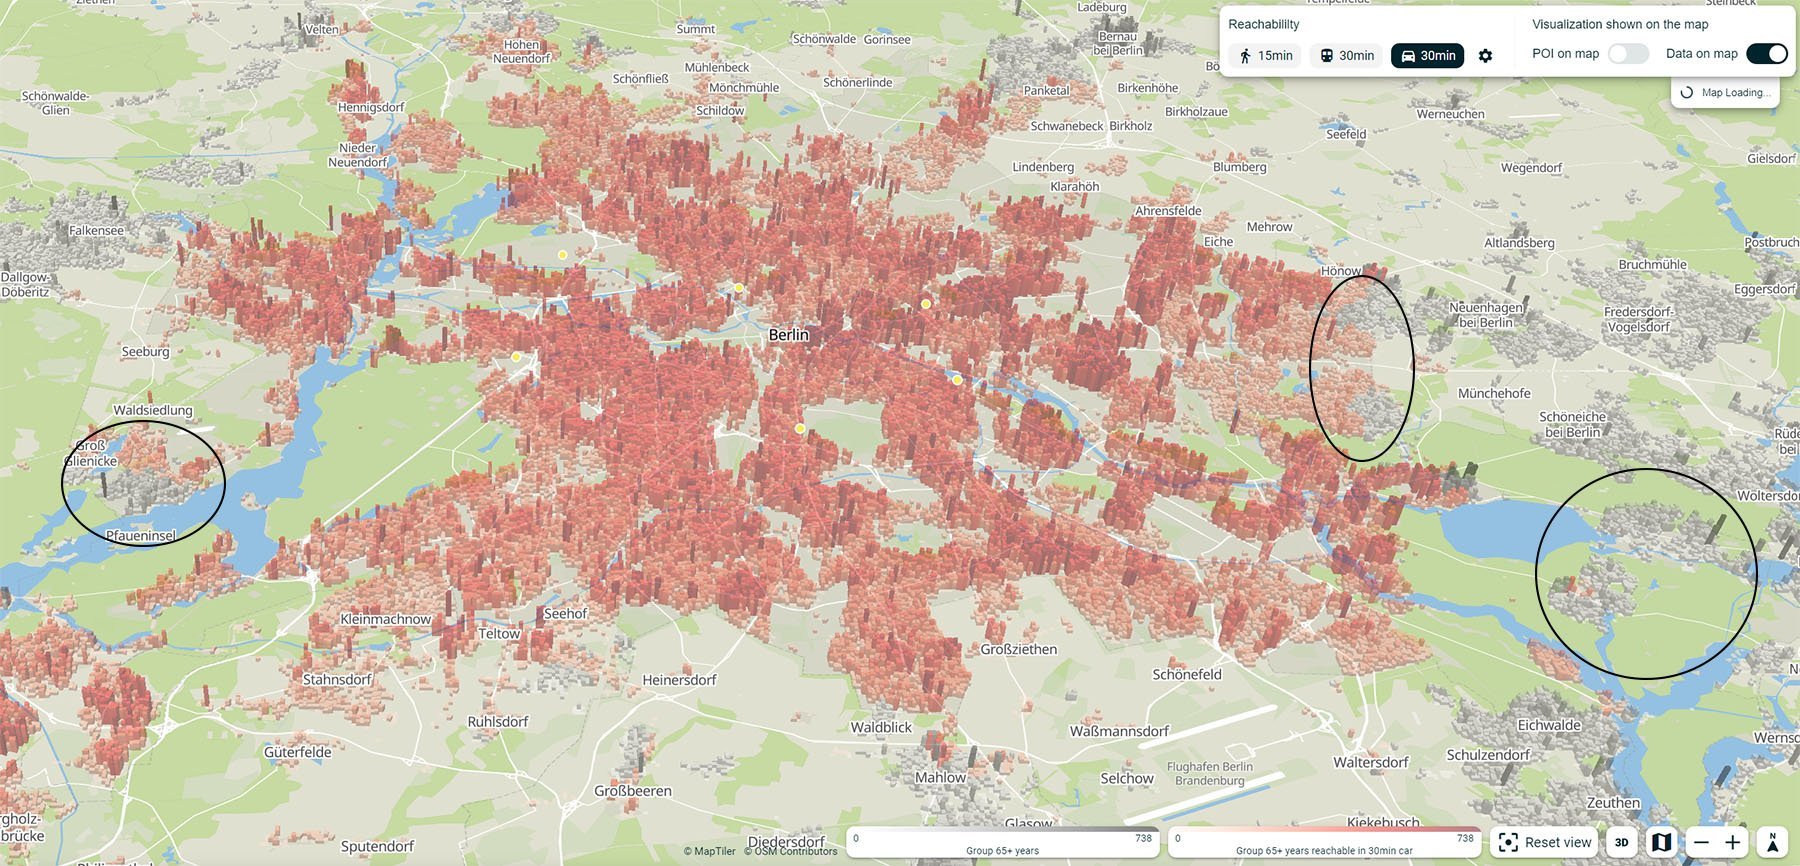 A map showing the locations in red from which people aged 65 or older can reach one of Berlin's vaccination centers within 30 minutes by car.